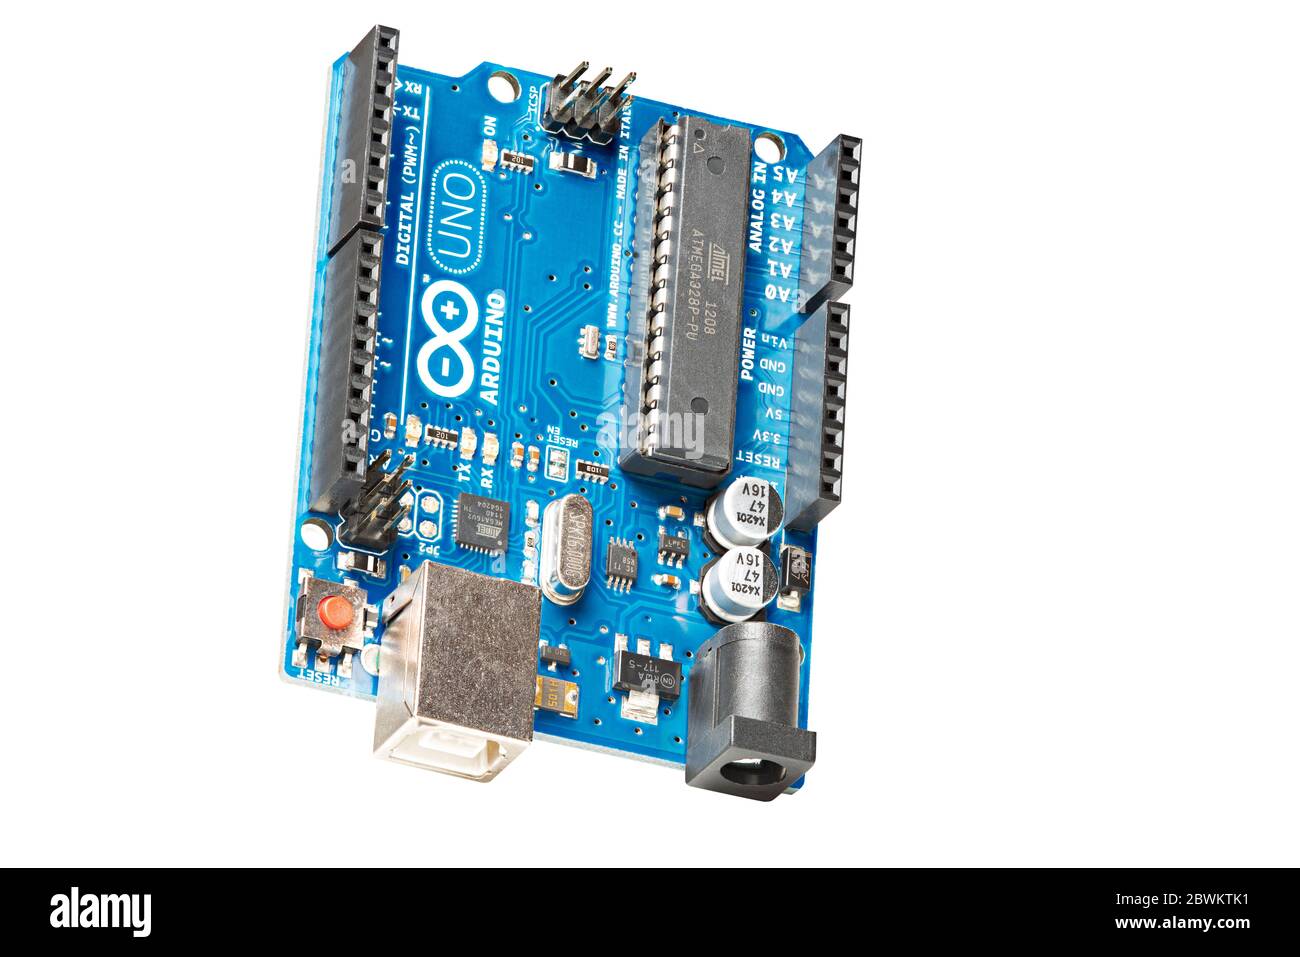 DURBAN SOUTH AFRICA - MARCH 28 2020: Arduino Uno, open source microcontroller development board, isolated on a white background Stock Photo